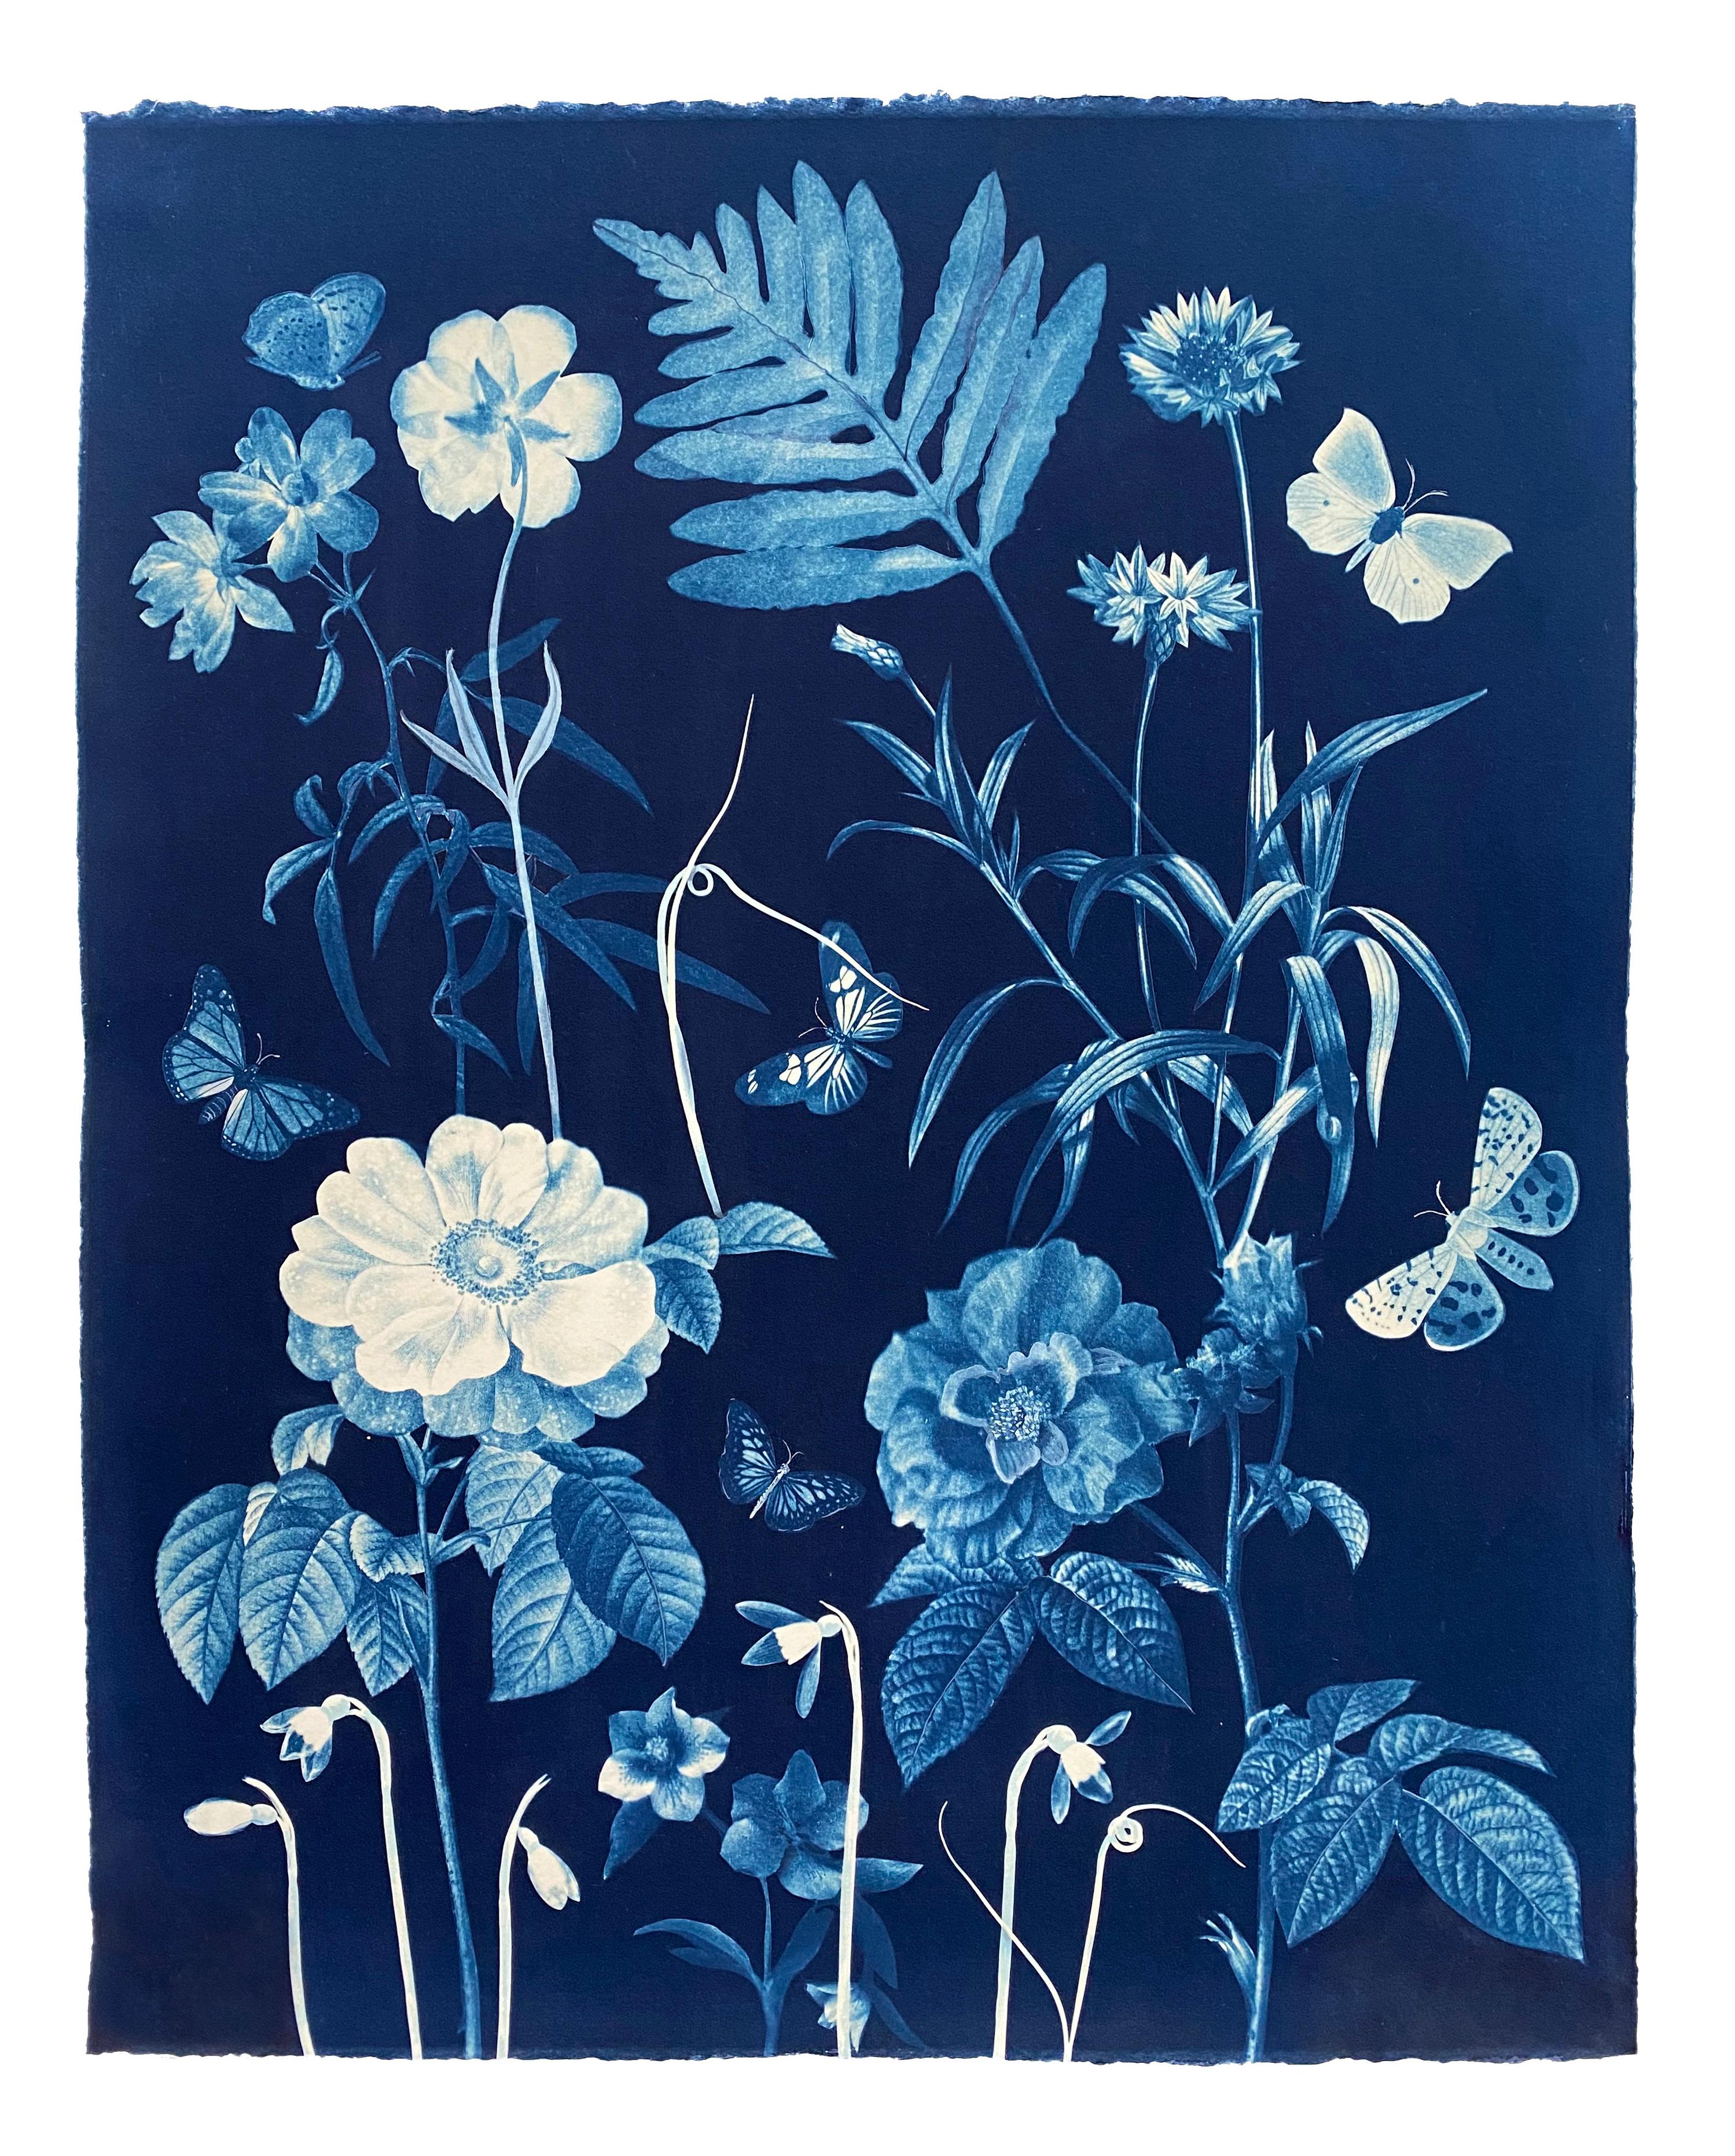 Cyanotype Painting Roses, Snowdrops, Pollinators, Botanical Painting on Blue - Art by Julia Whitney Barnes